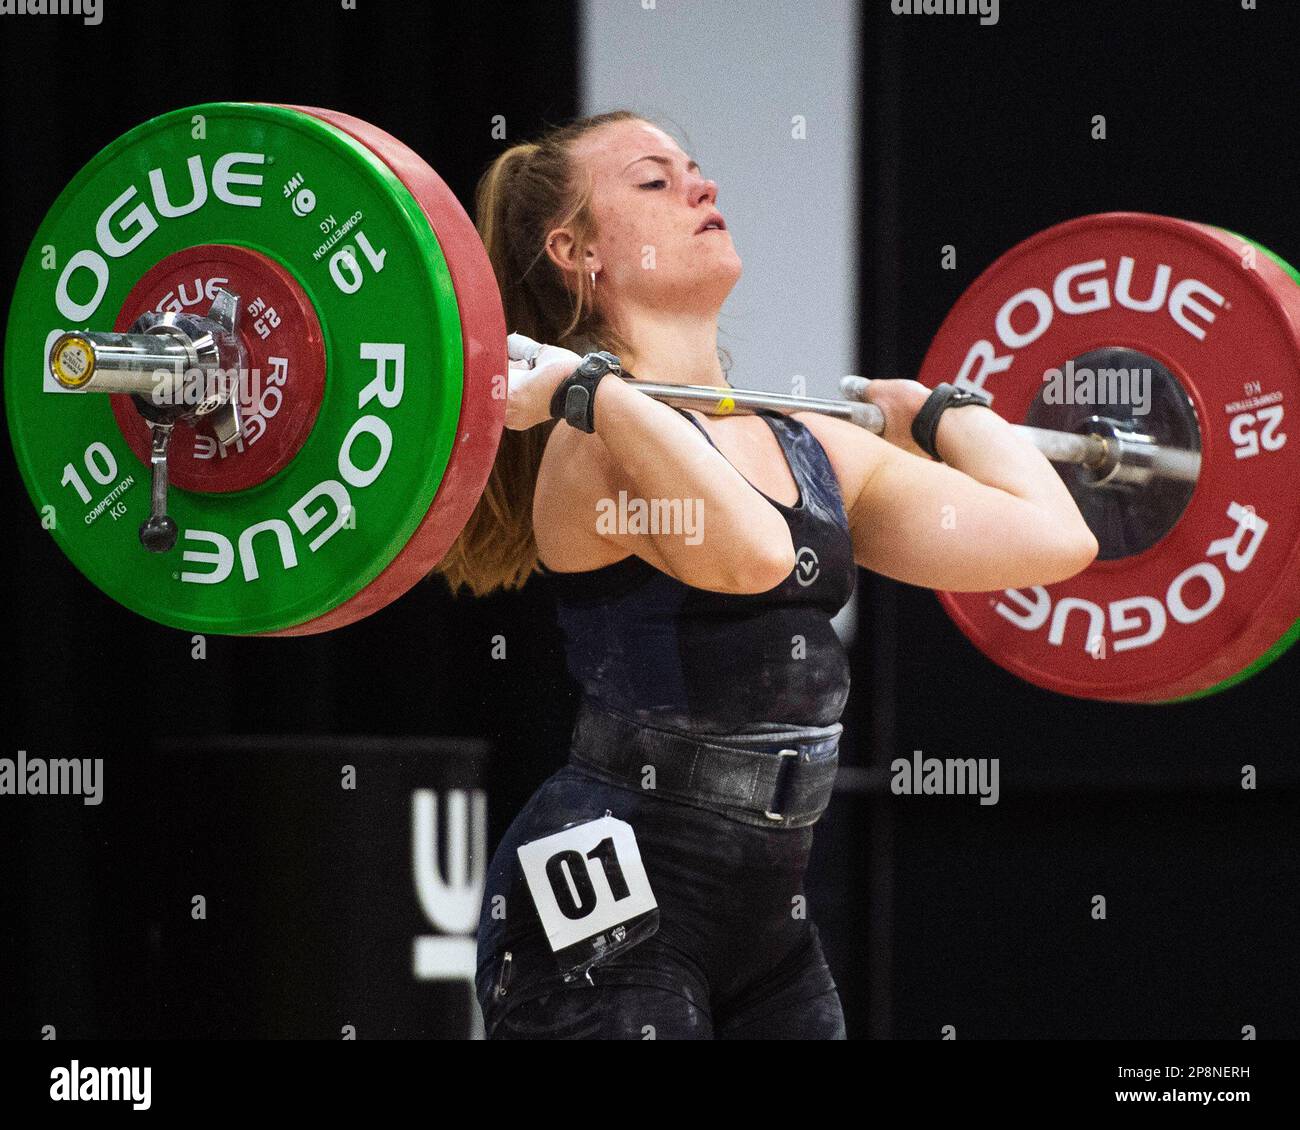 Columbus, Ohio, United States. 3th Mar, 2023. Miranda Ulrey attempts to lift 95kgs at the Weightlifting competiton in the Women's 55kg category in the clean and jerk in Columbus, Ohio, USA. Credit: Brent Clark/Alamy Live News Stock Photo